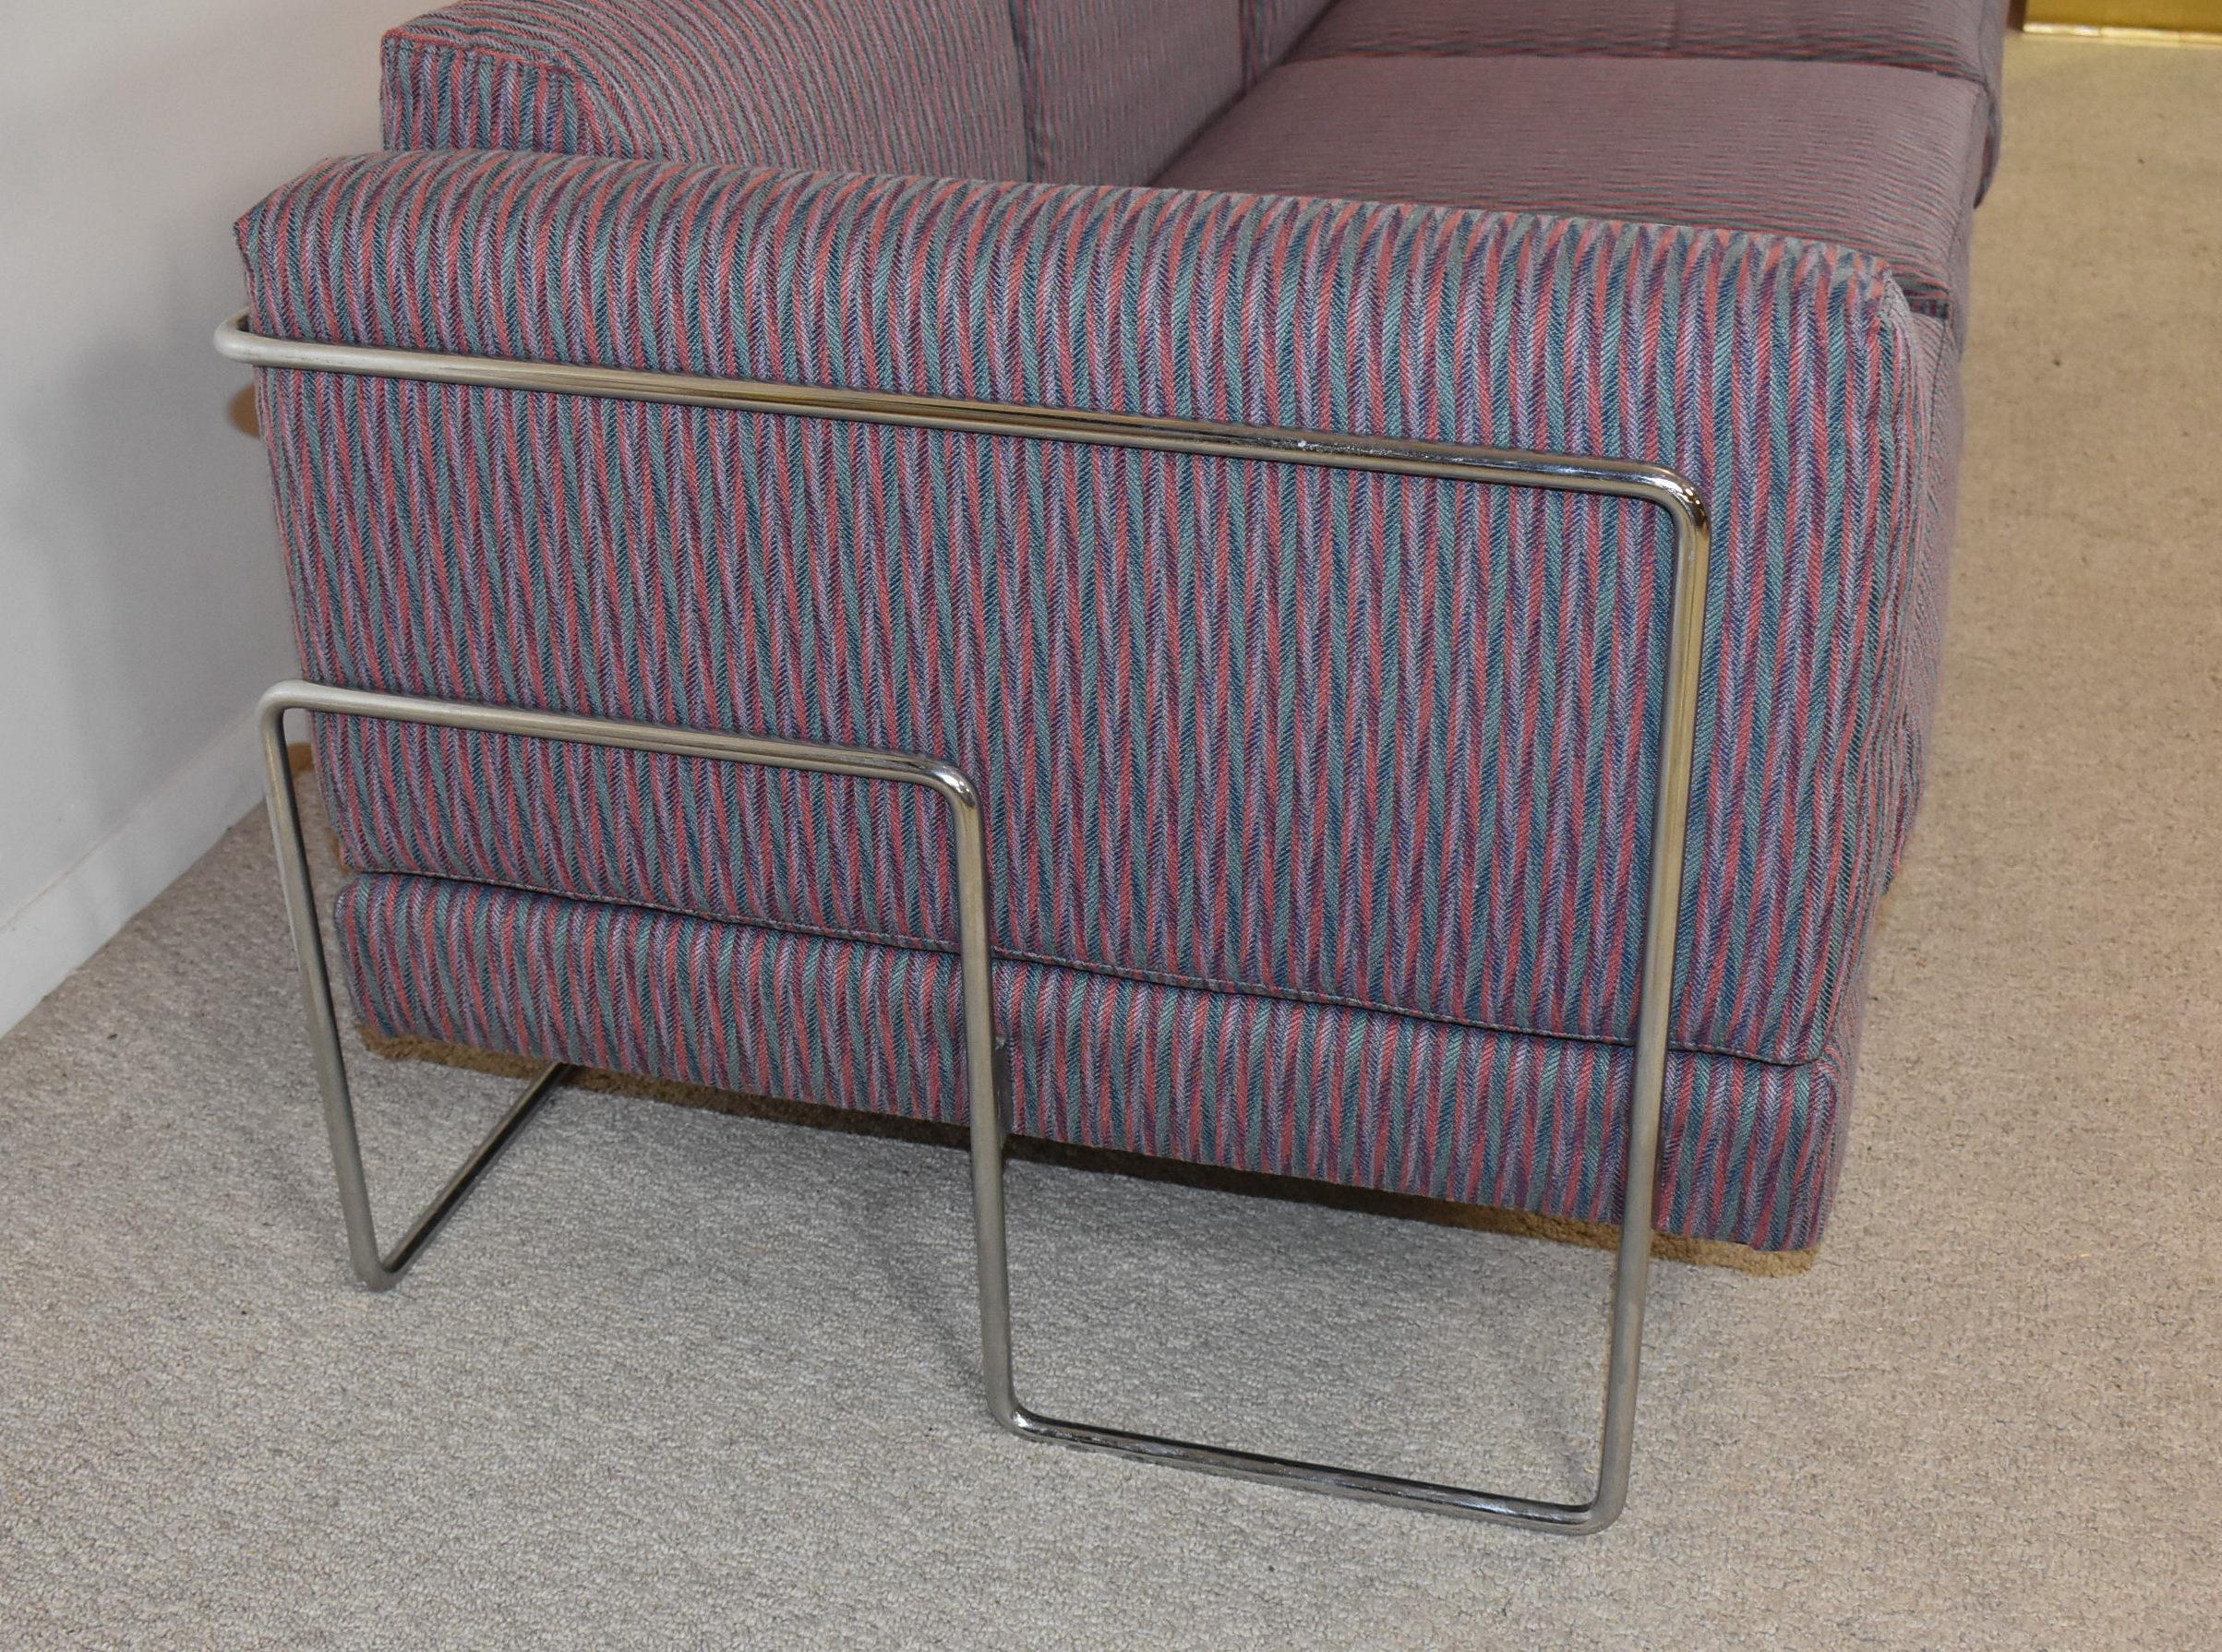 Pen Club Sofa with Chrome Frame by Kwok Hoi Chan In Good Condition For Sale In Toledo, OH